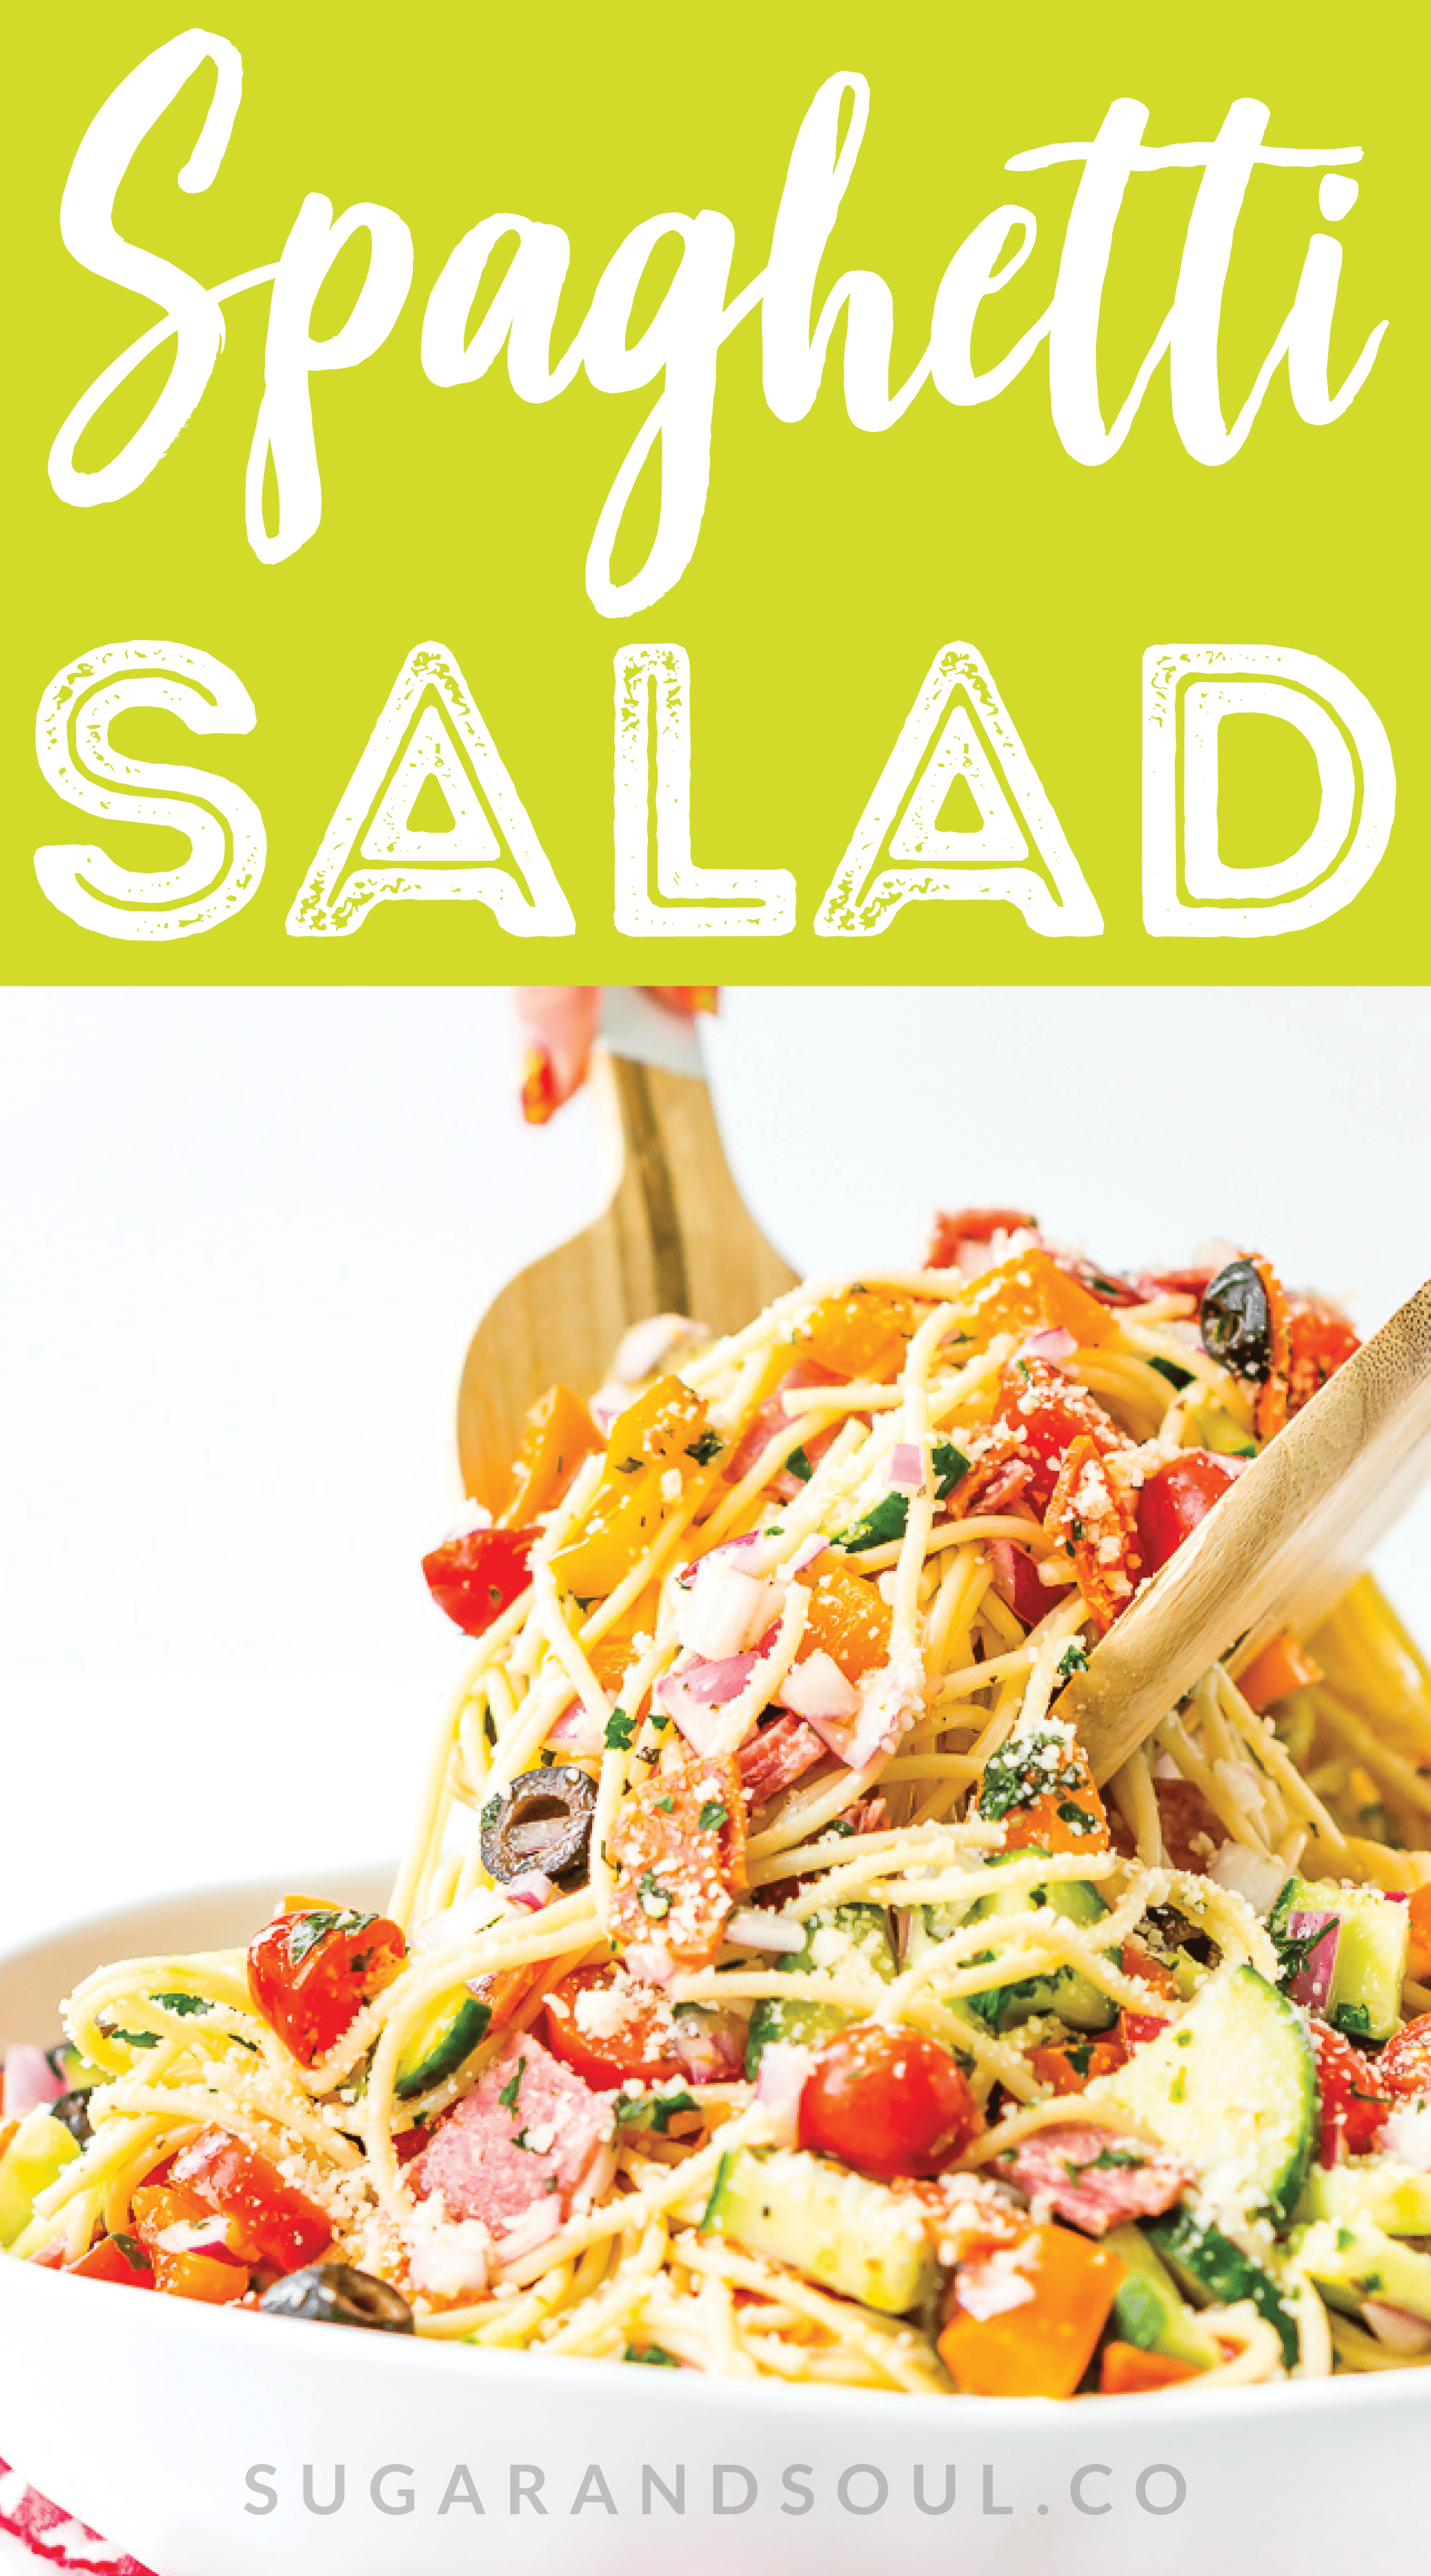 Spaghetti Salad is loaded with veggies, pepperoni, and salami, then tossed in an oil and vinegar dressing. Topped with a sprinkle of parsley and lots of Parmesan cheese, it’s a perfect summer meal or side dish! via @sugarandsoulco